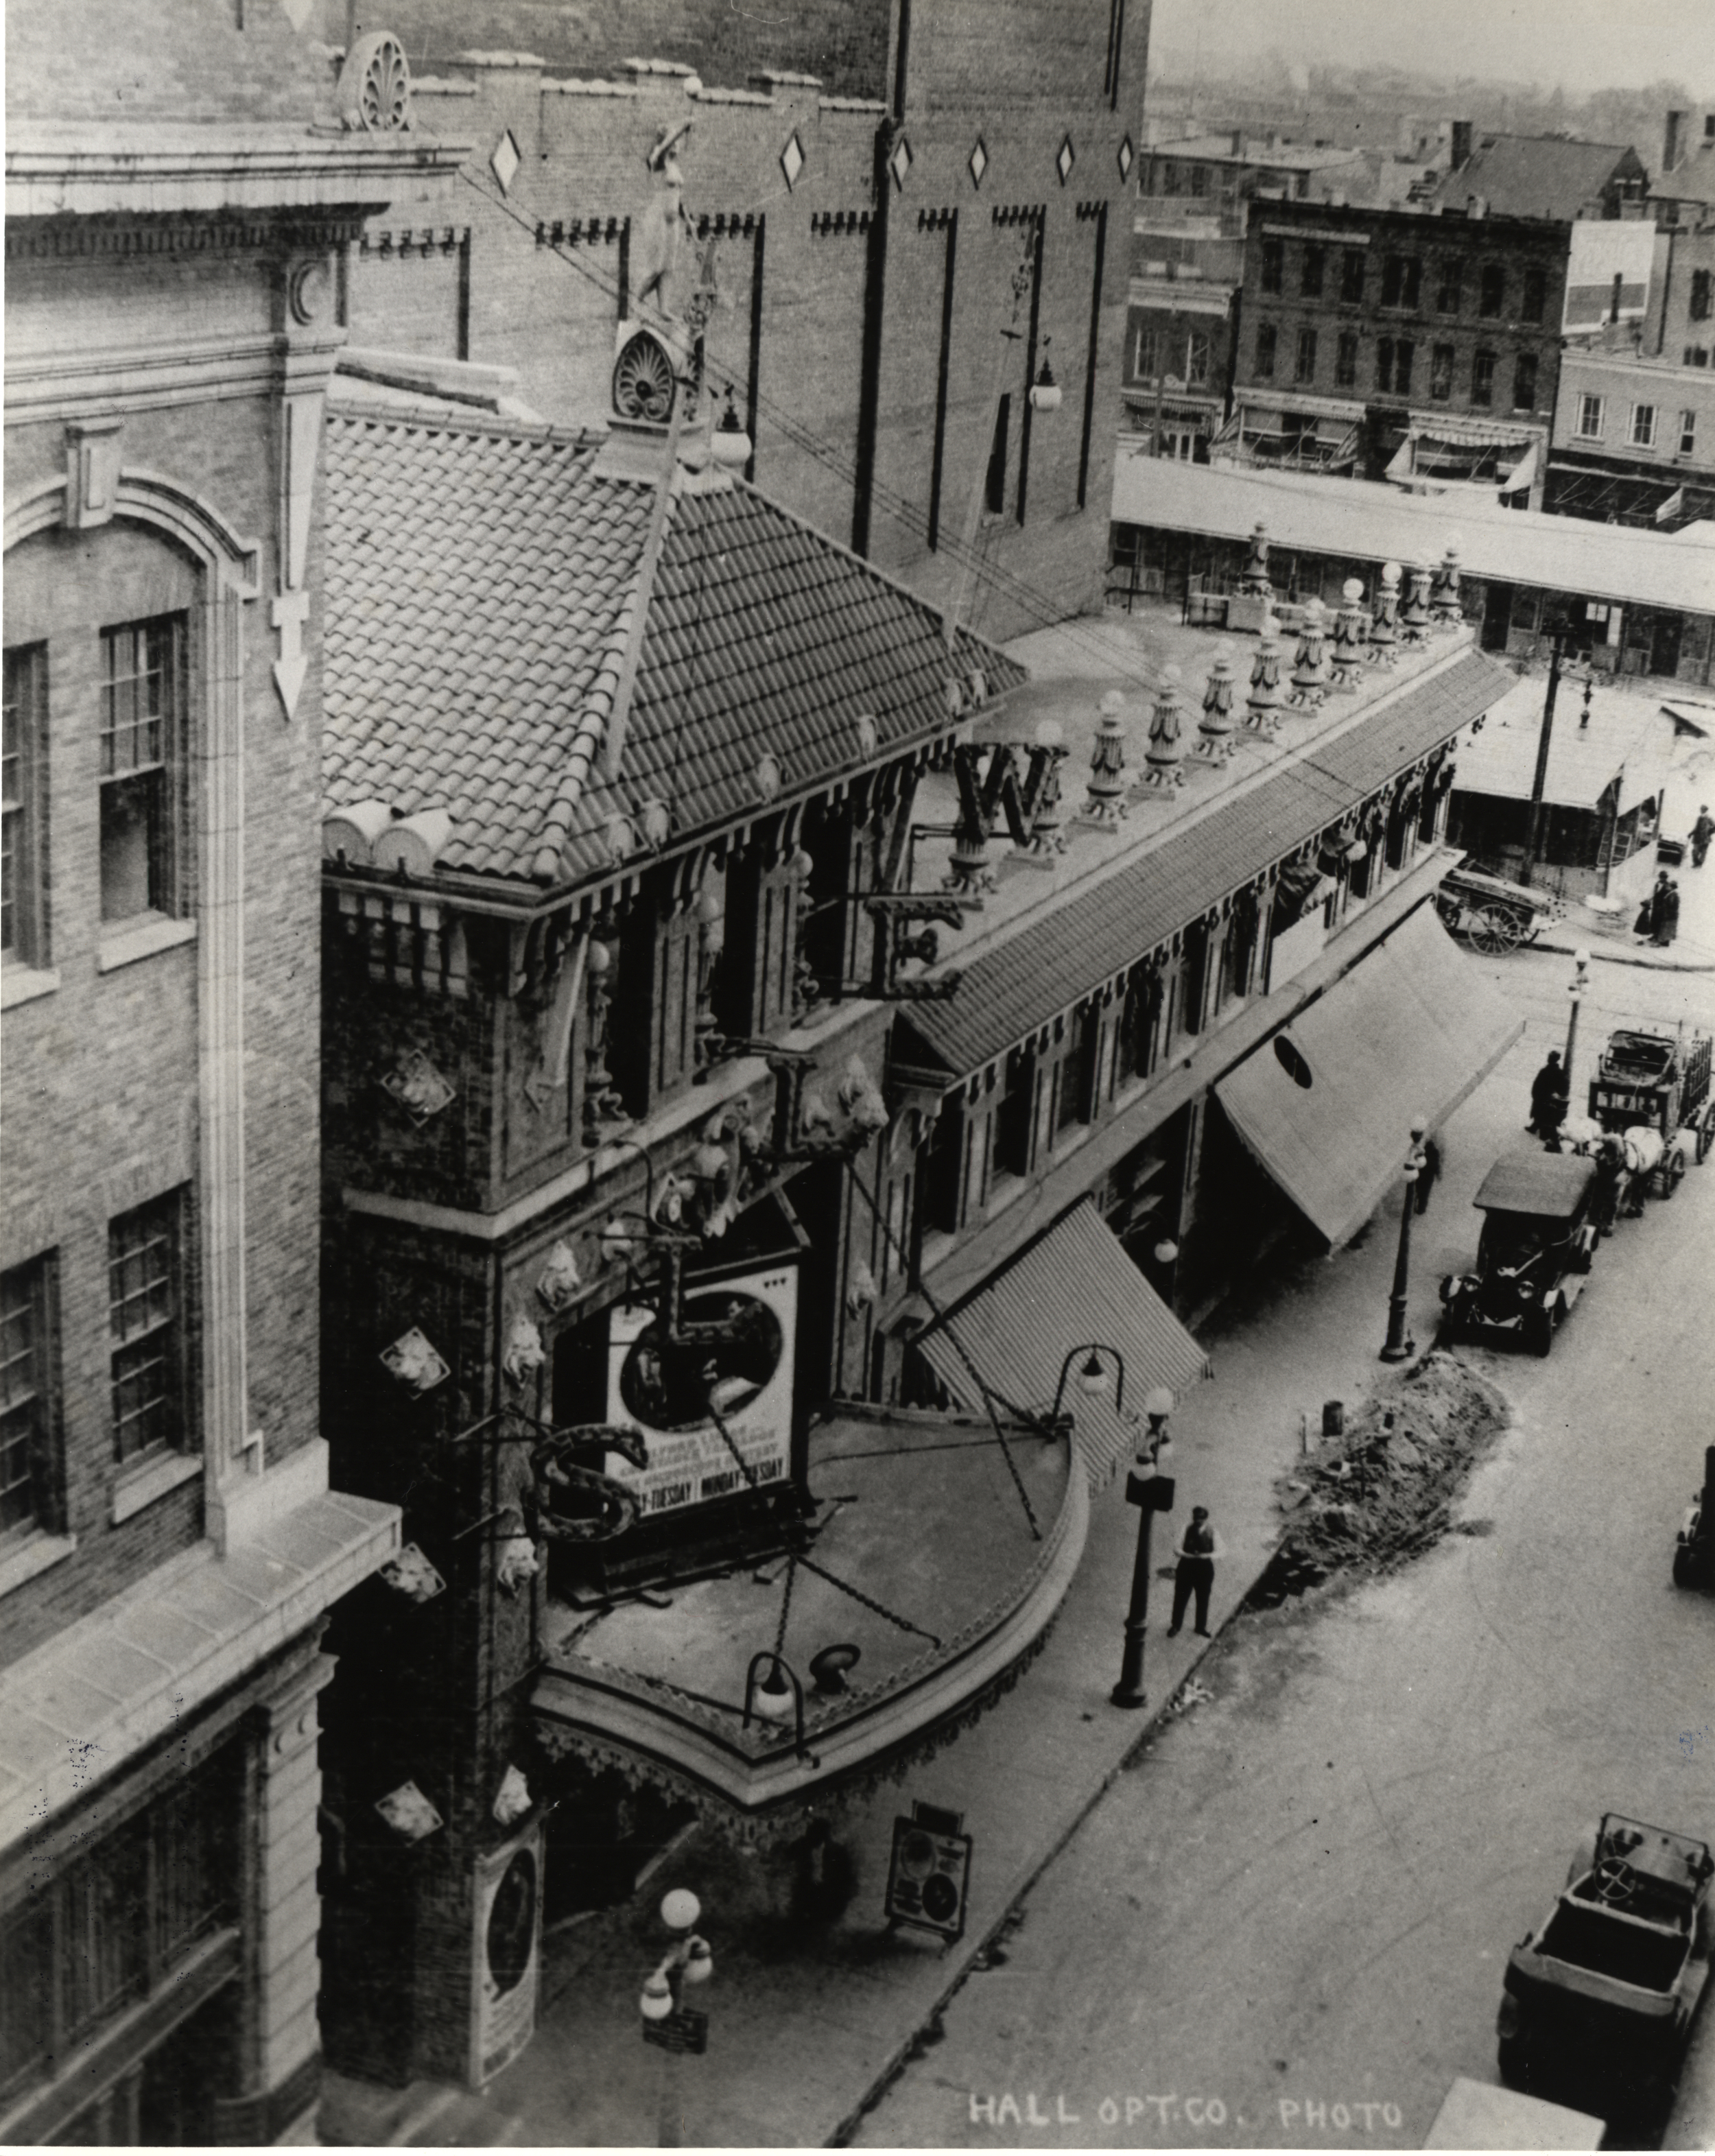  The Wells Theatre and Tazewell Street in the 1920s 